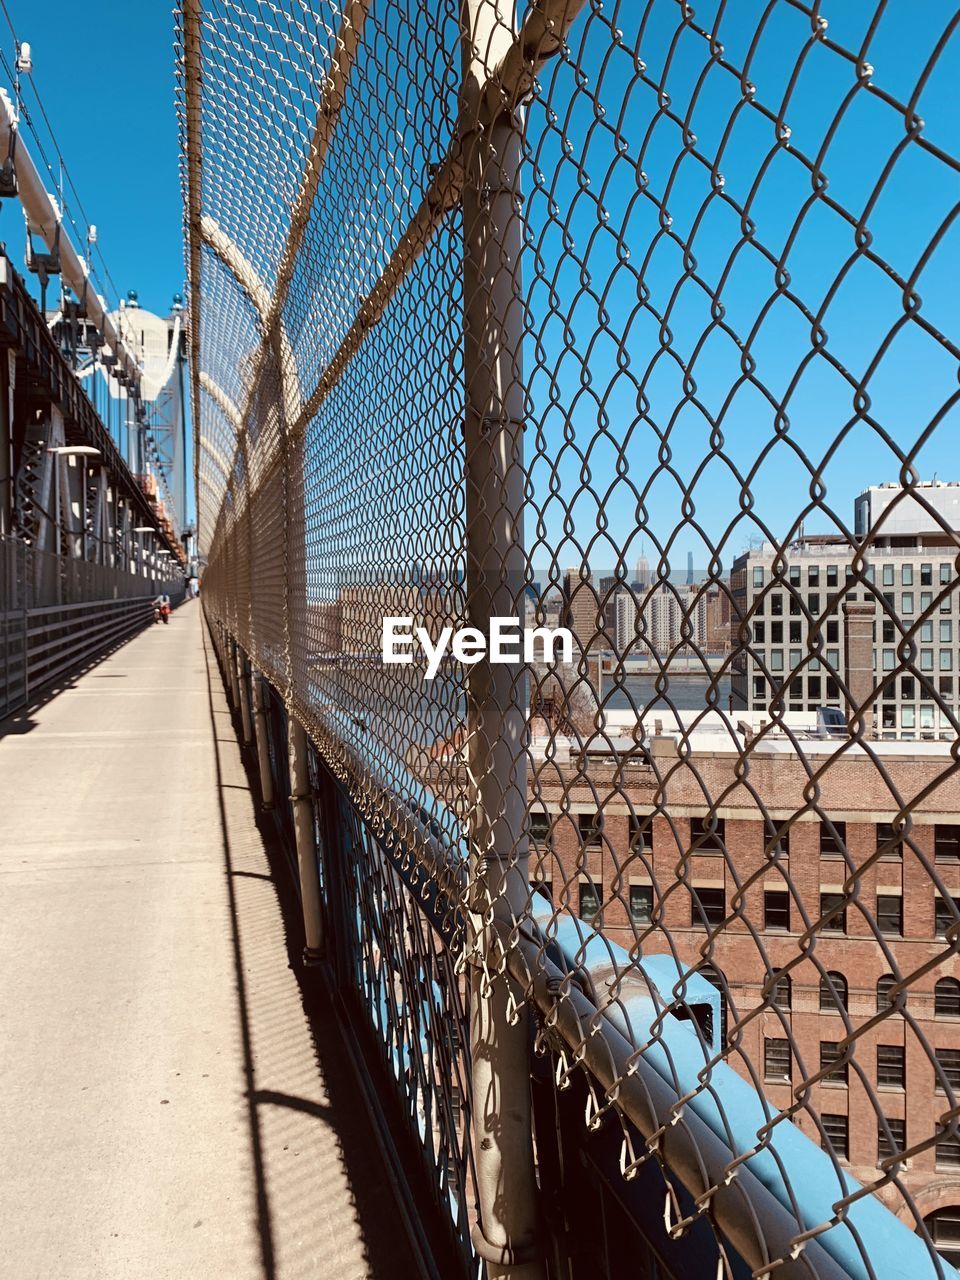 Chainlink fence against sky in city with bike lane over nyc bridge